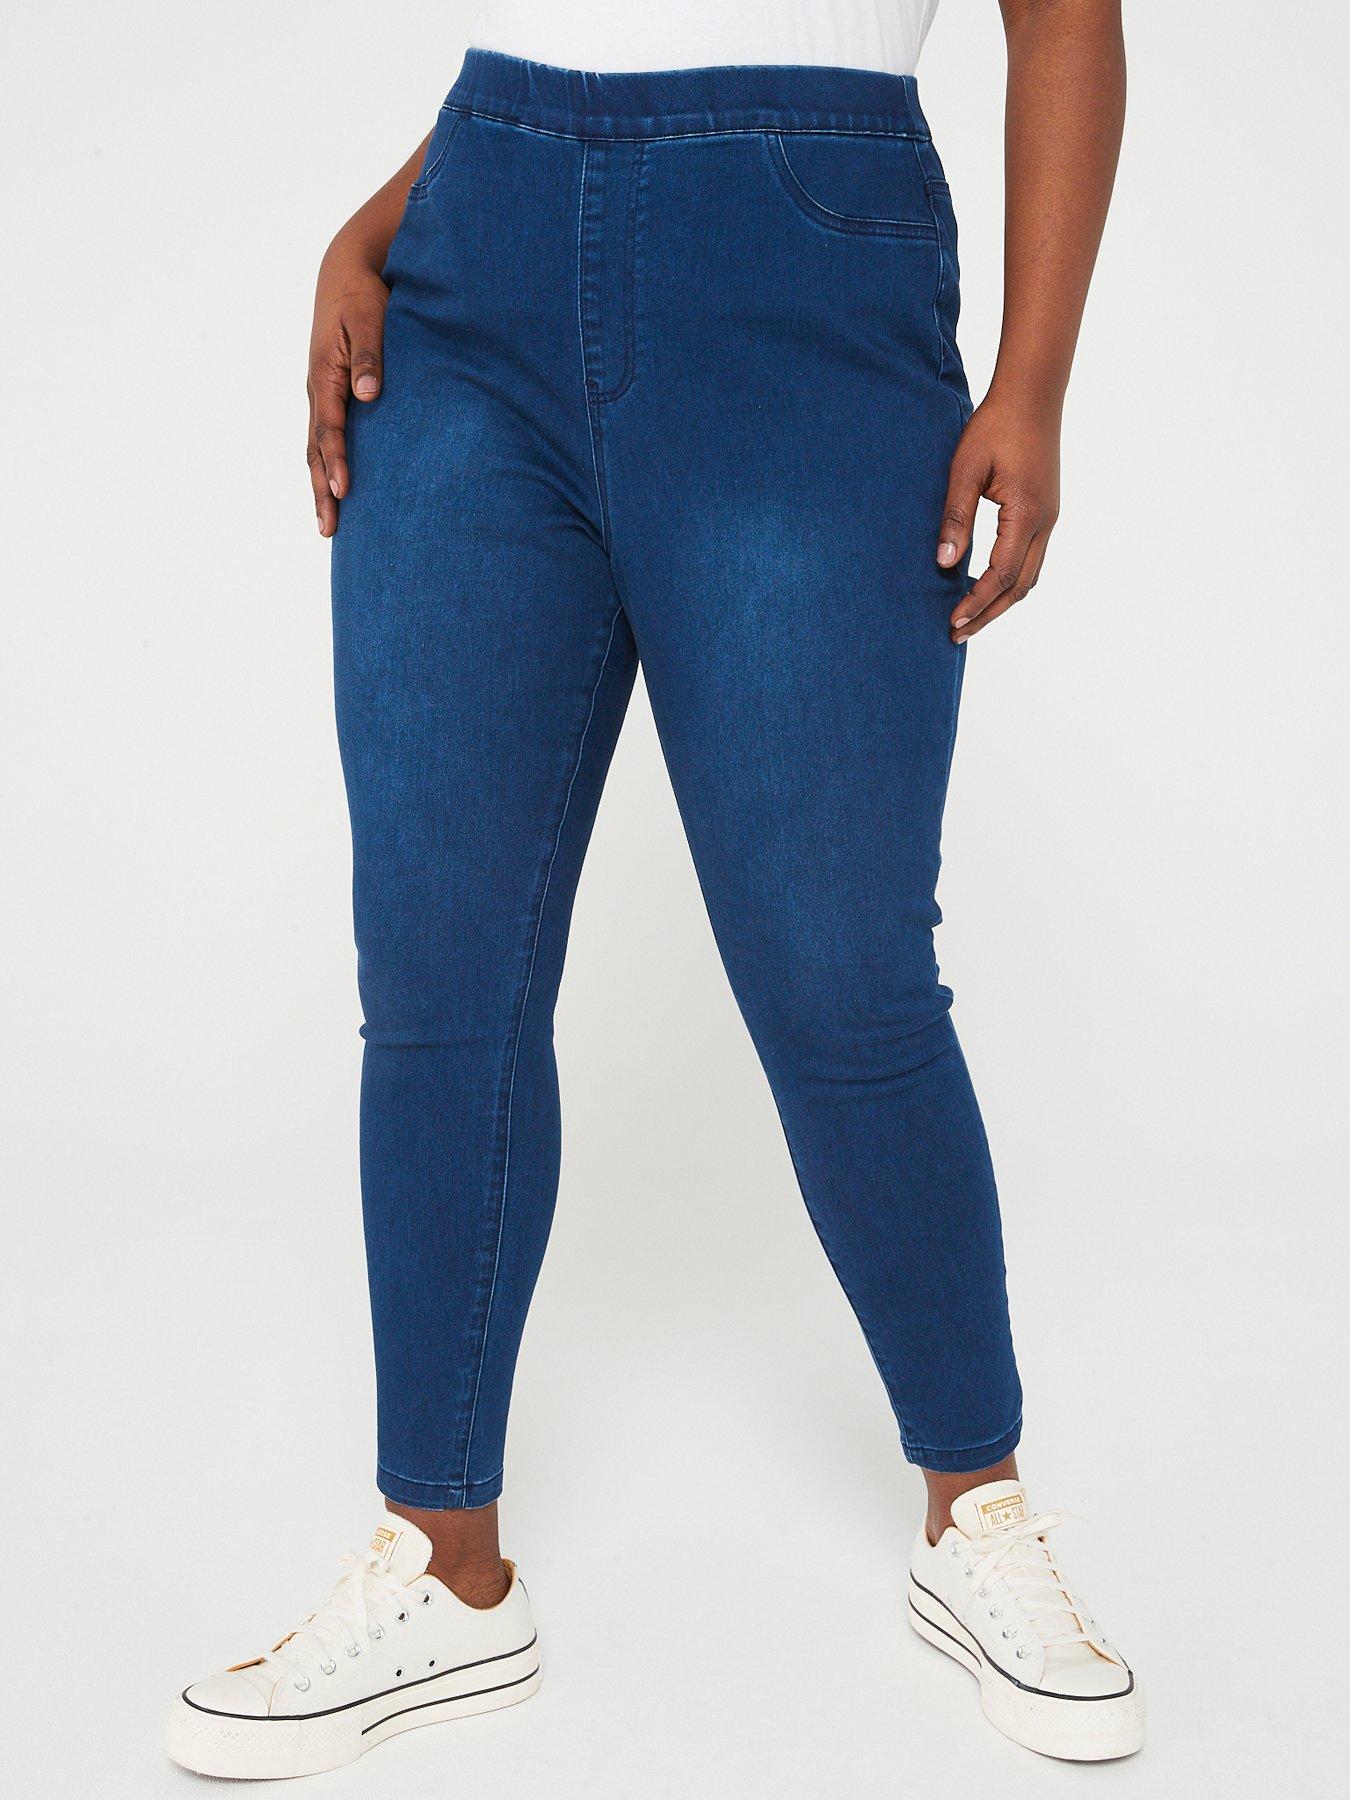 Plus Size Jeans, Women's Curved Jeans